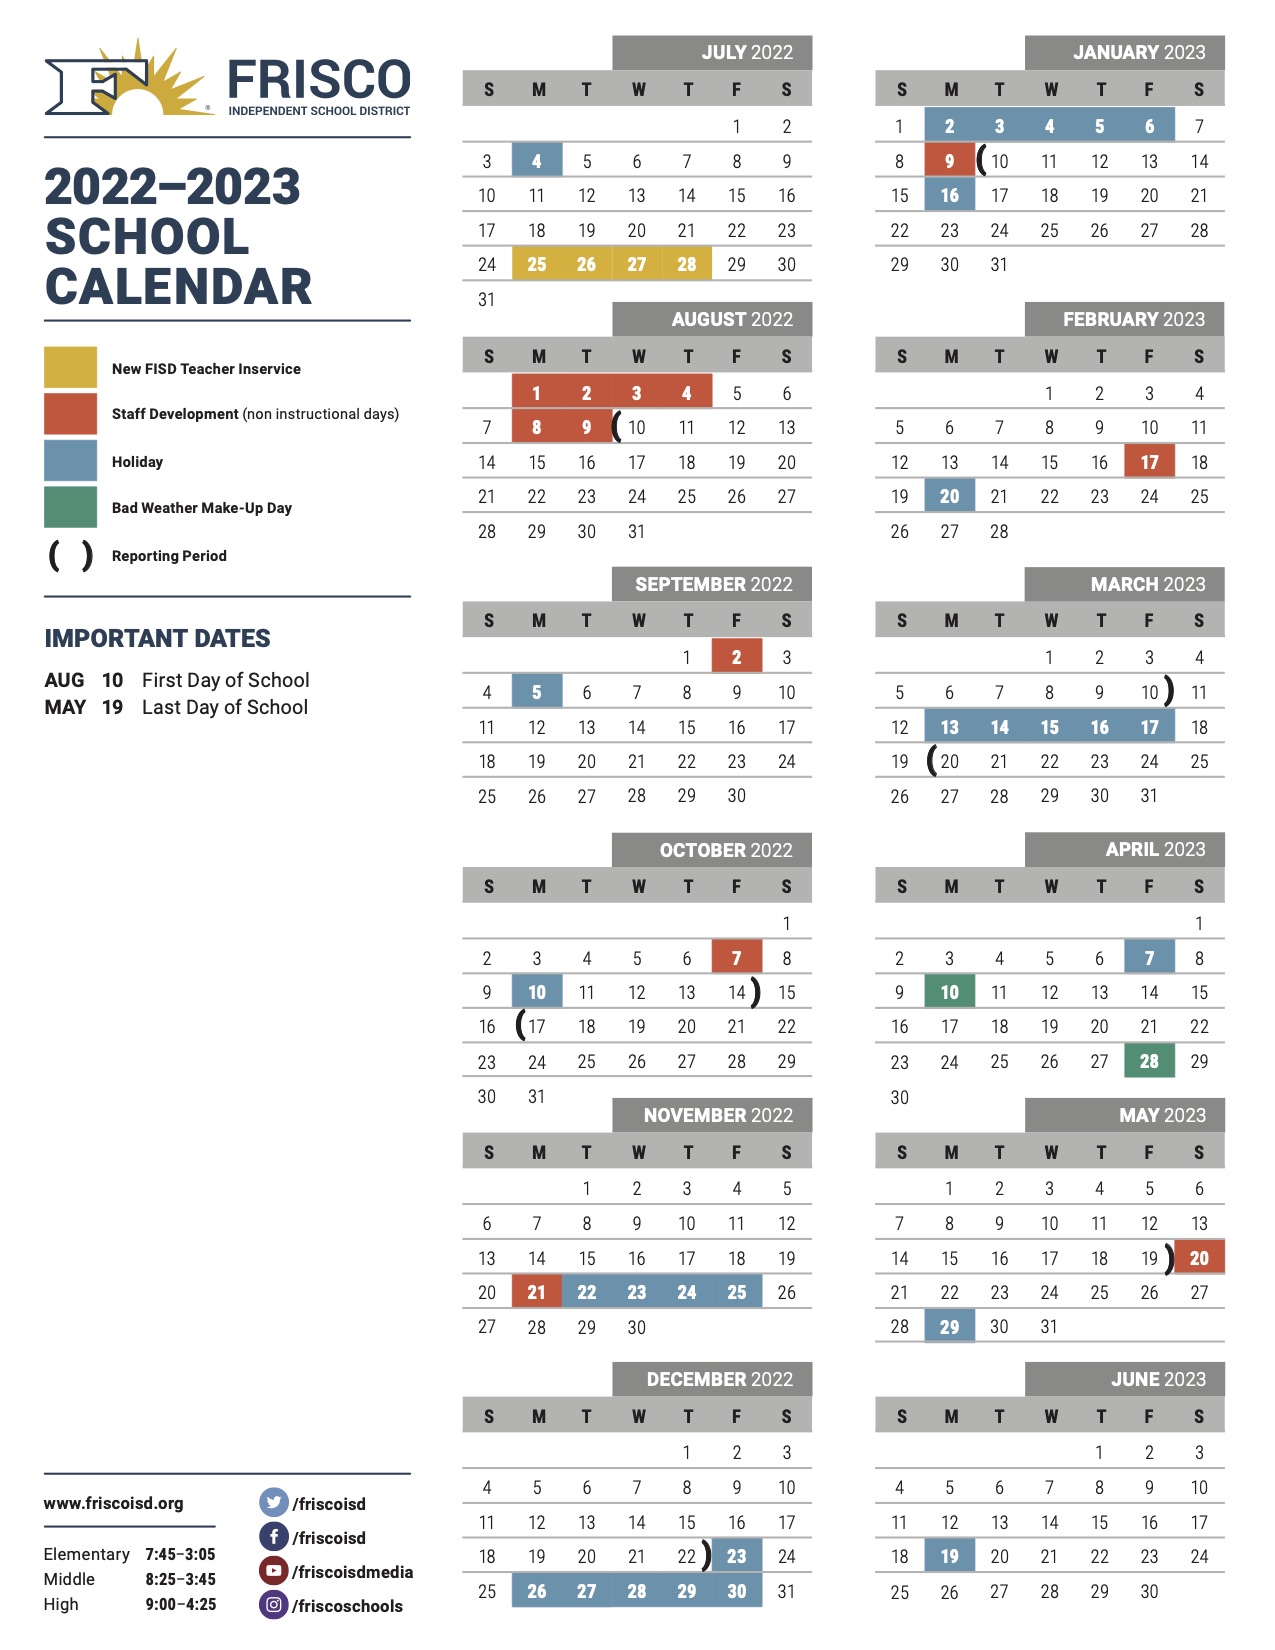 Frisco Isd 2022 23 Calendar Frisco Isd On Twitter: "The Frisco Isd Academic Calendar Has Been Approved  For The 2022-23 School Year. Check Out Https://T.co/Jlvoekeccp For An  Overview Of The Calendar. Https://T.co/C8Gs8Lflru" / Twitter